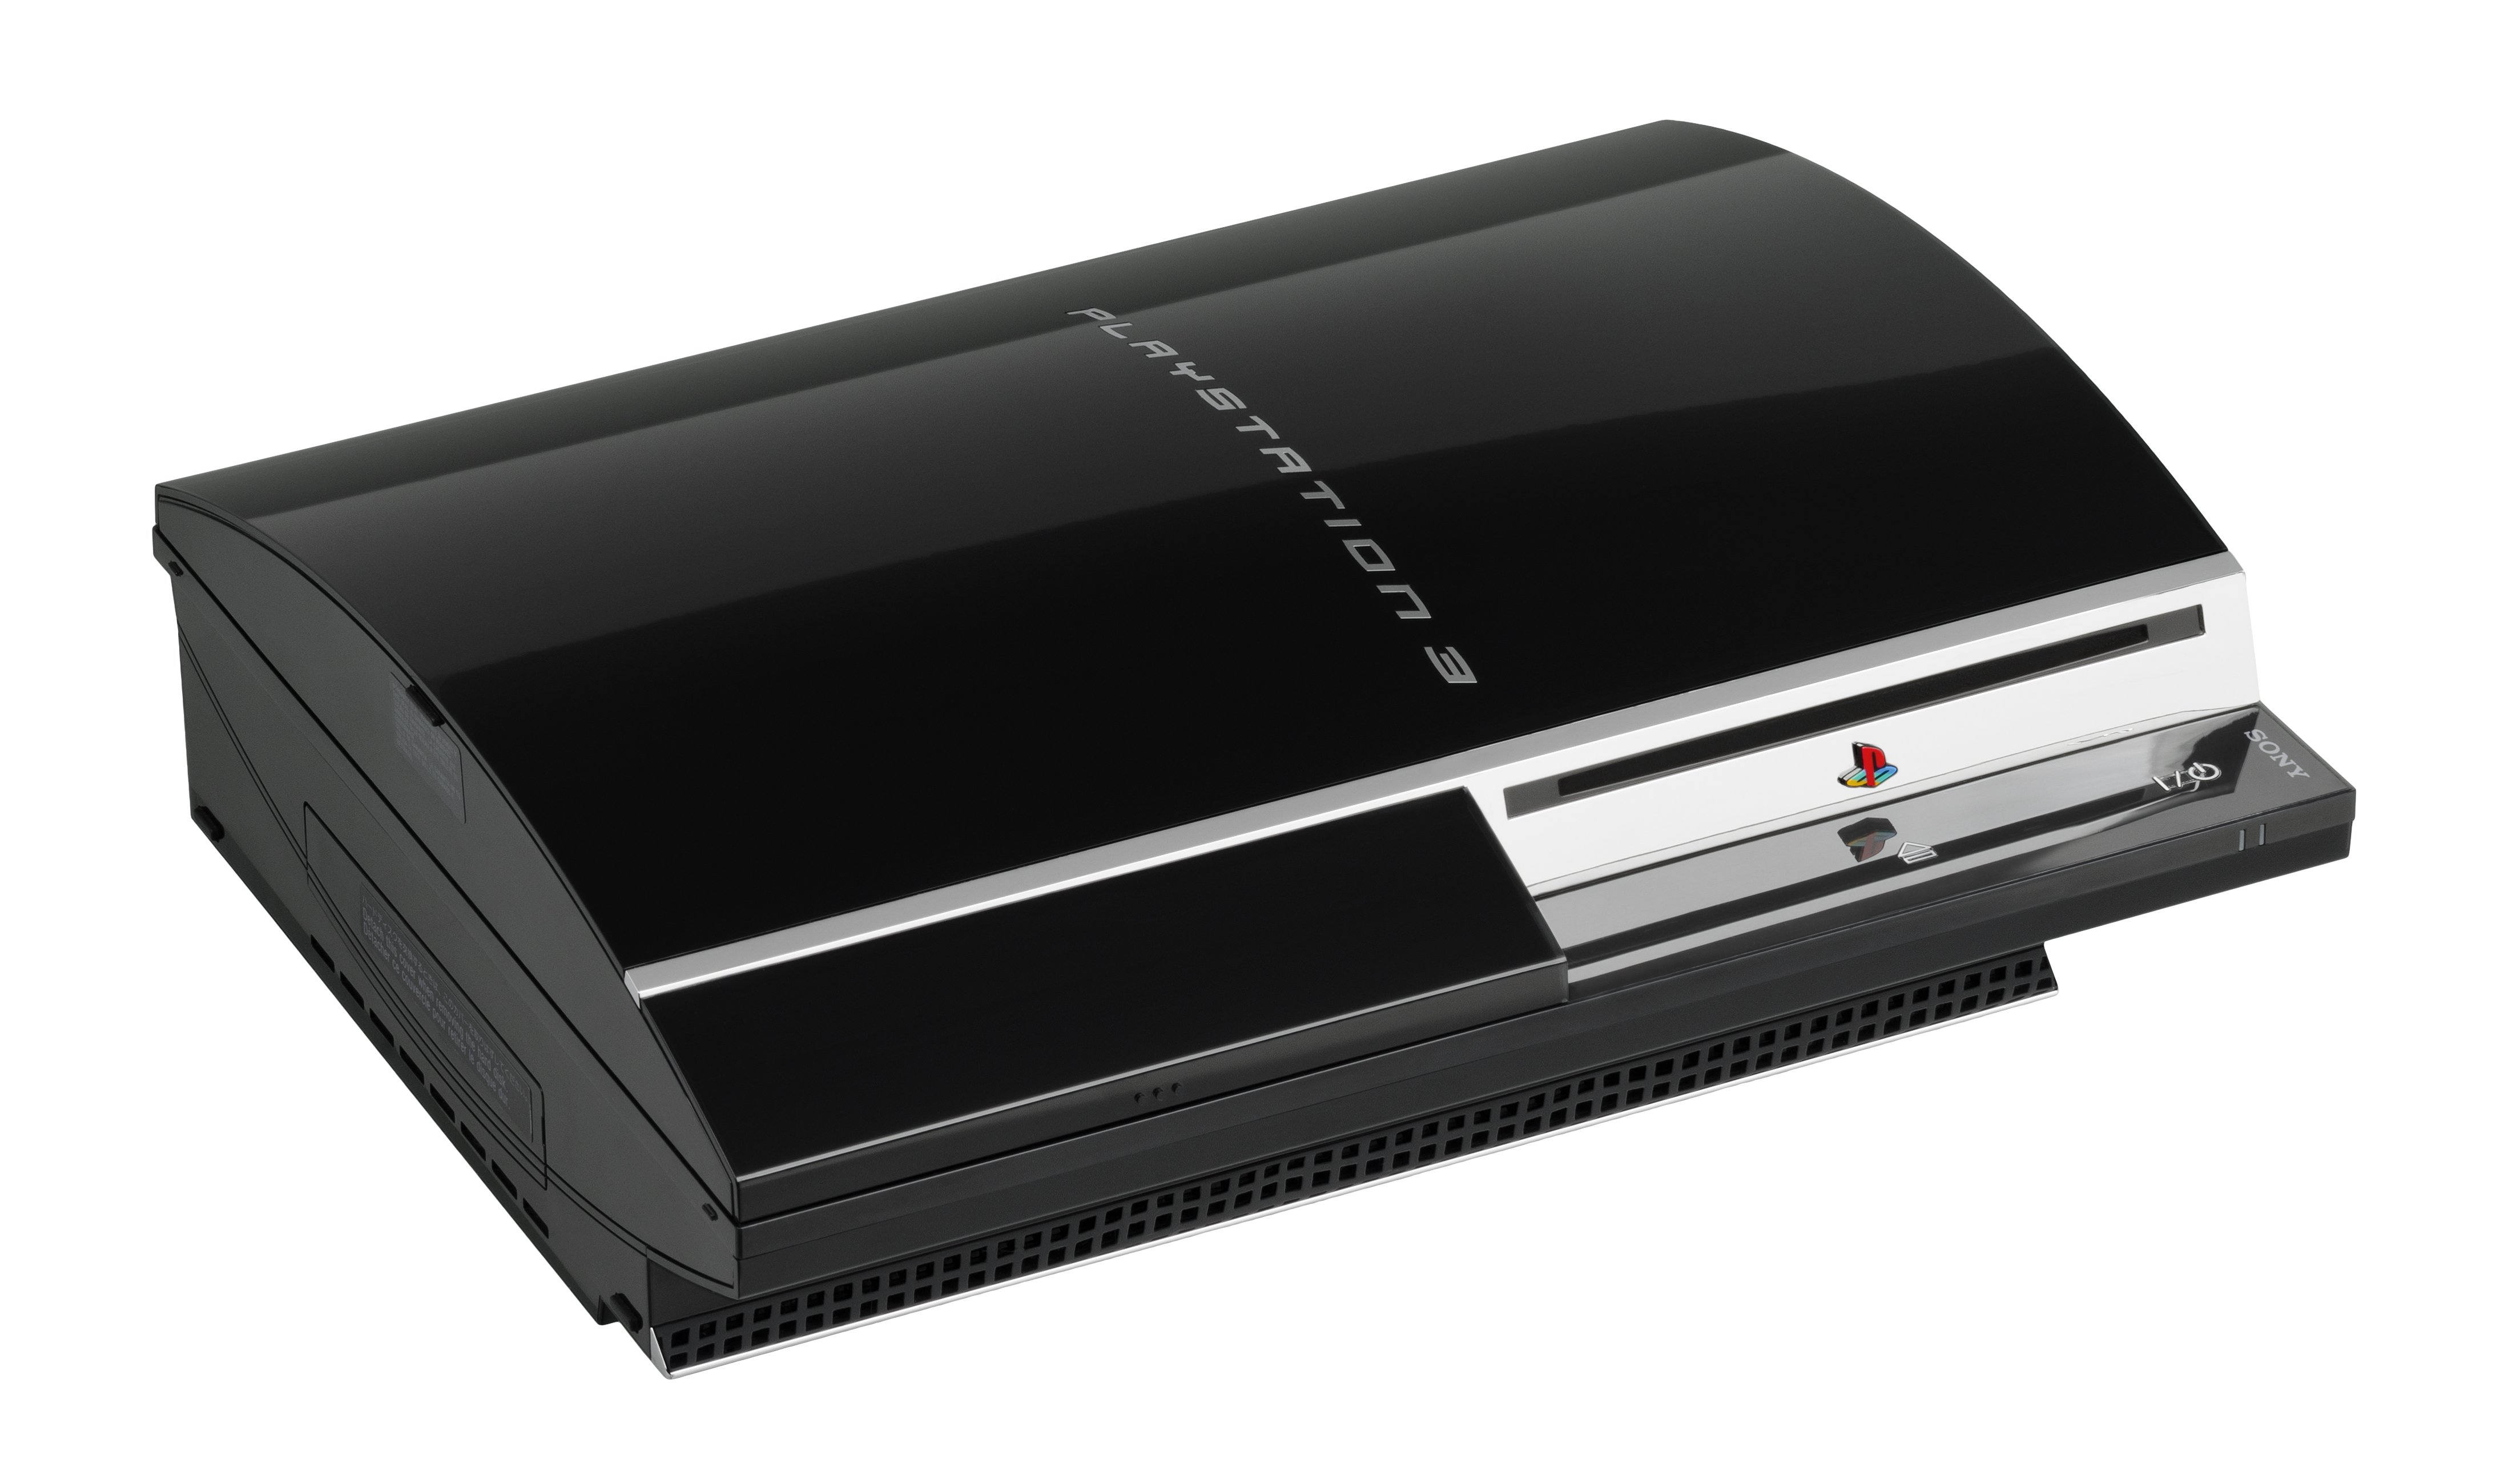 PlayStation 3 Price Reveal was a 'Horrifying Says